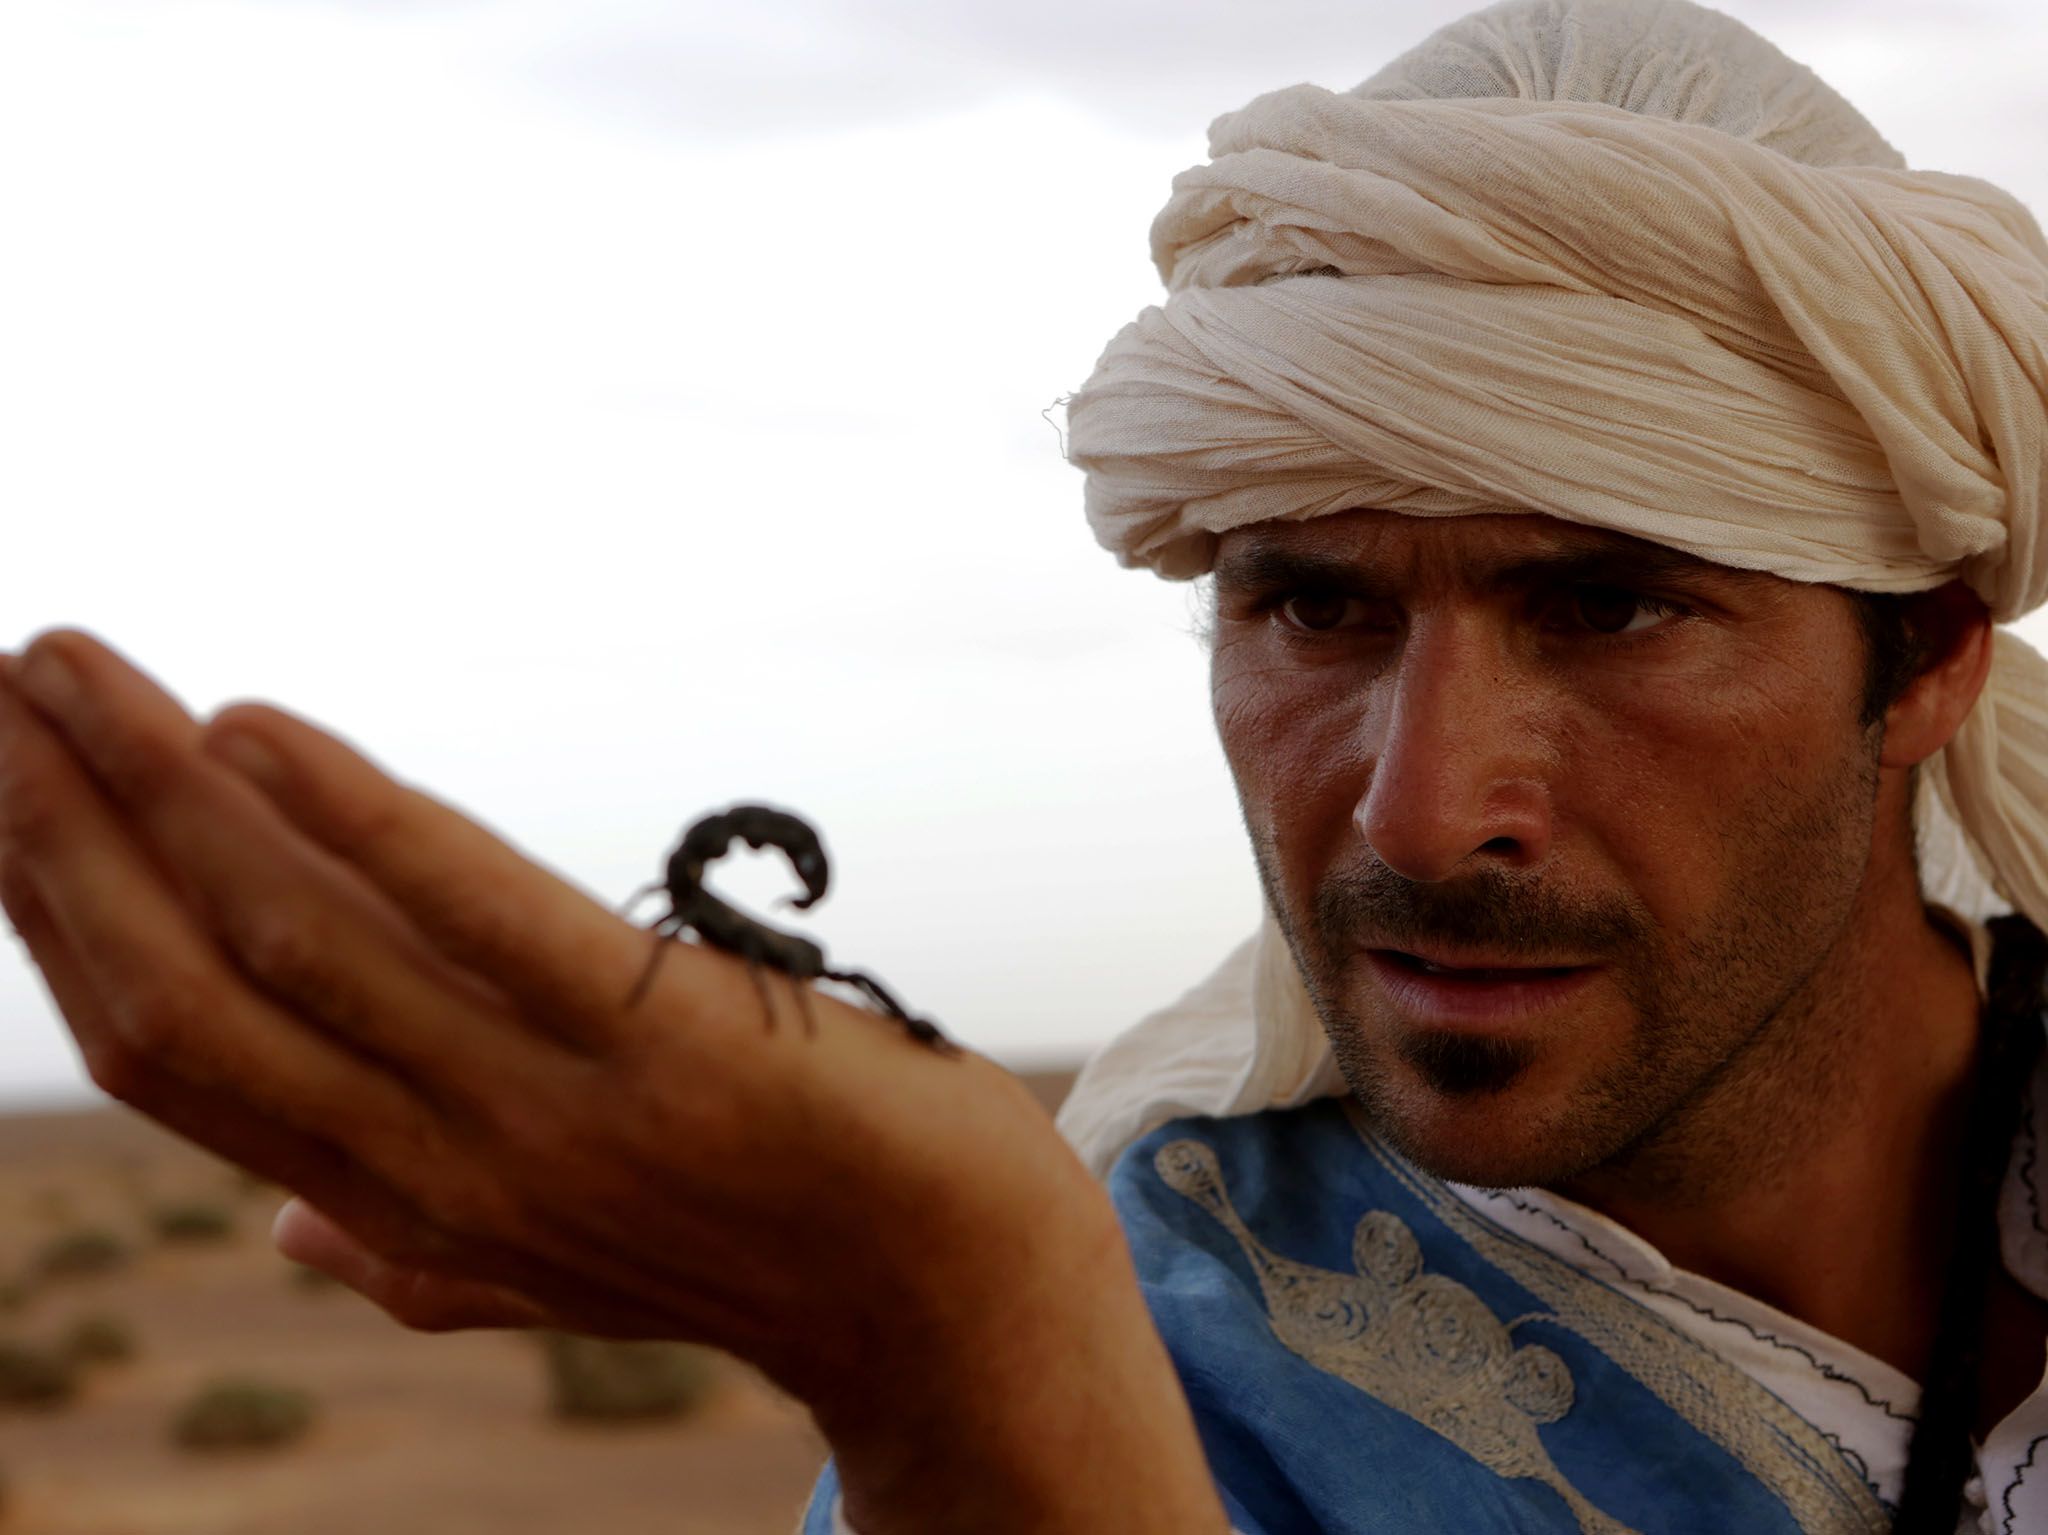 Morocco: Hazen holds a poisonous scorpion. This image is from Primal Survivor. [Photo of the day - May 2017]